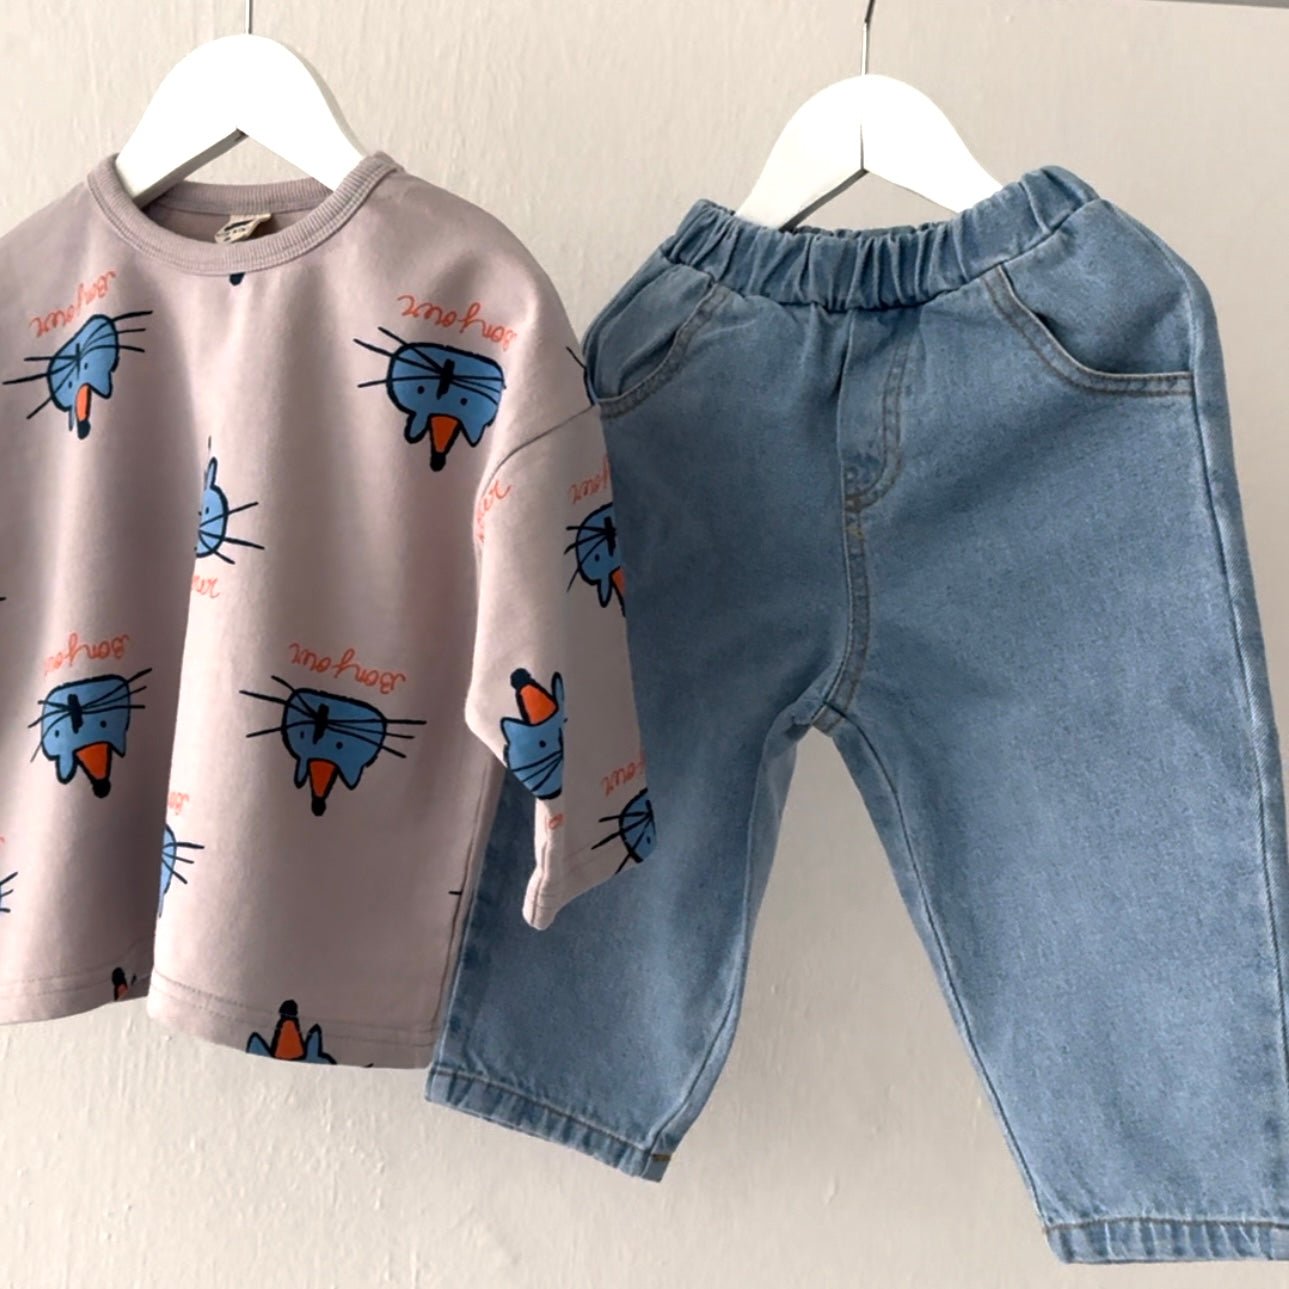 Bonjour Cat Tee find Stylish Fashion for Little People- at Little Foxx Concept Store